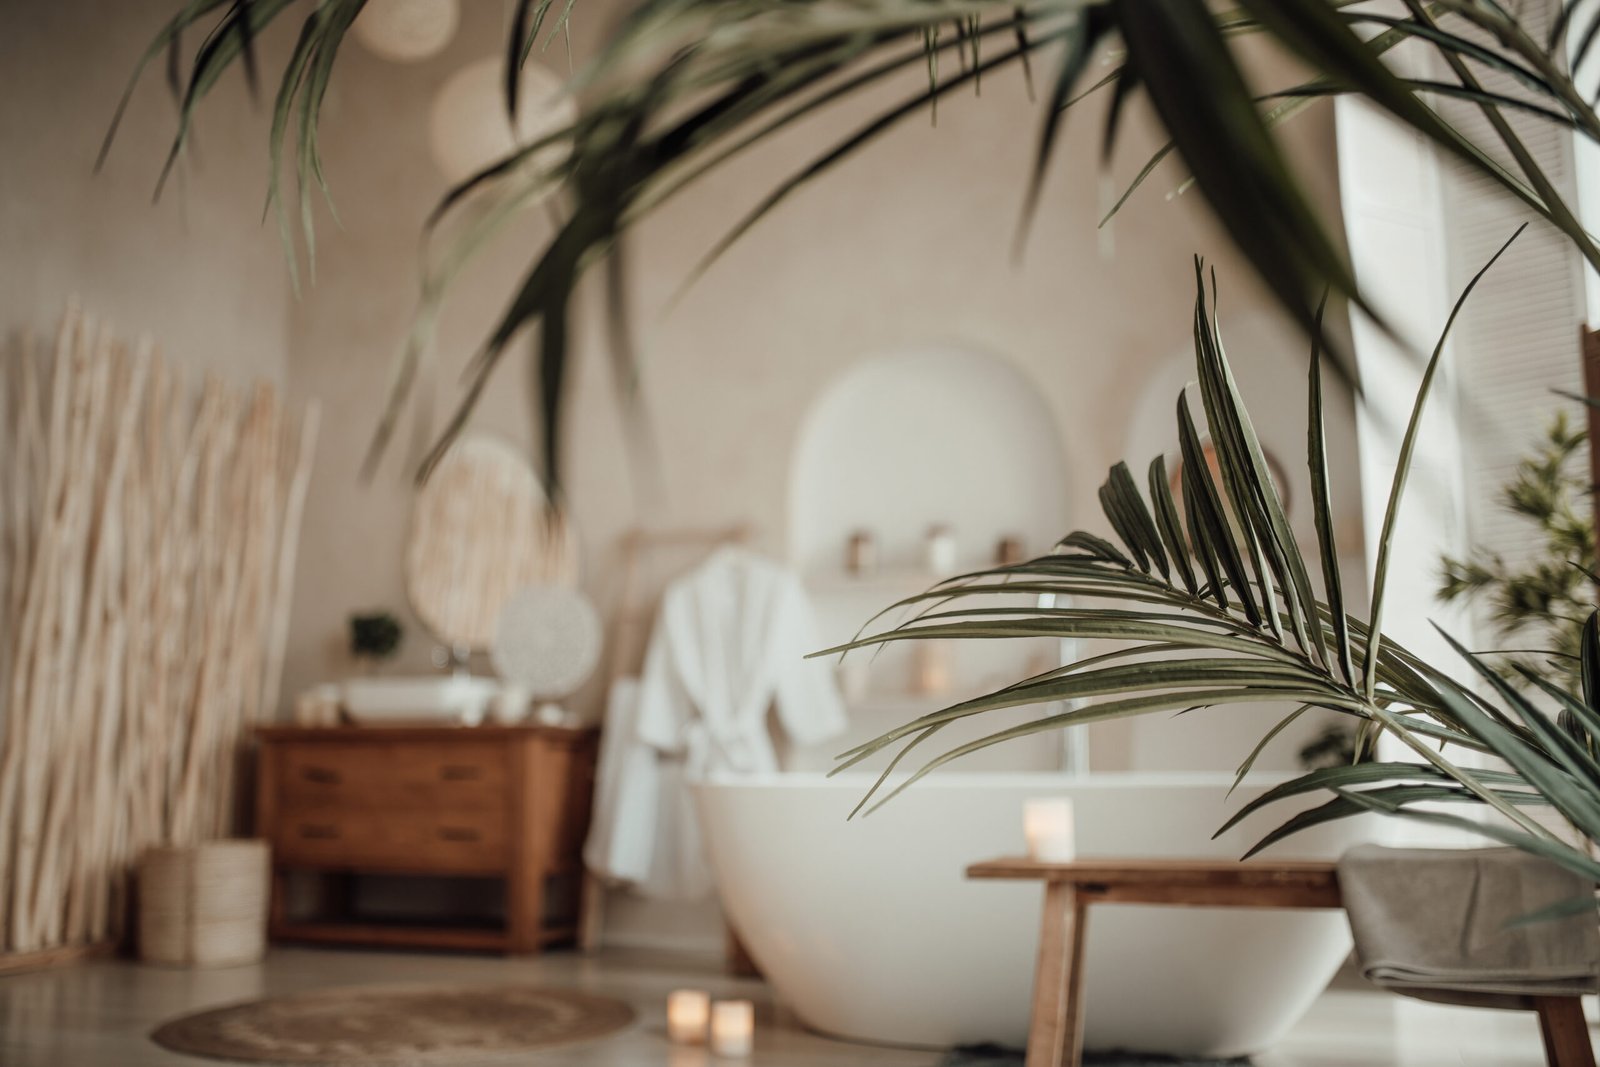 Soft native hues organic shapes look of bathroom with big window oval bathtub in neutrals tones. Green palm plants candles bubblebath leasure and relaxation skin selfcare wellness luxury living.